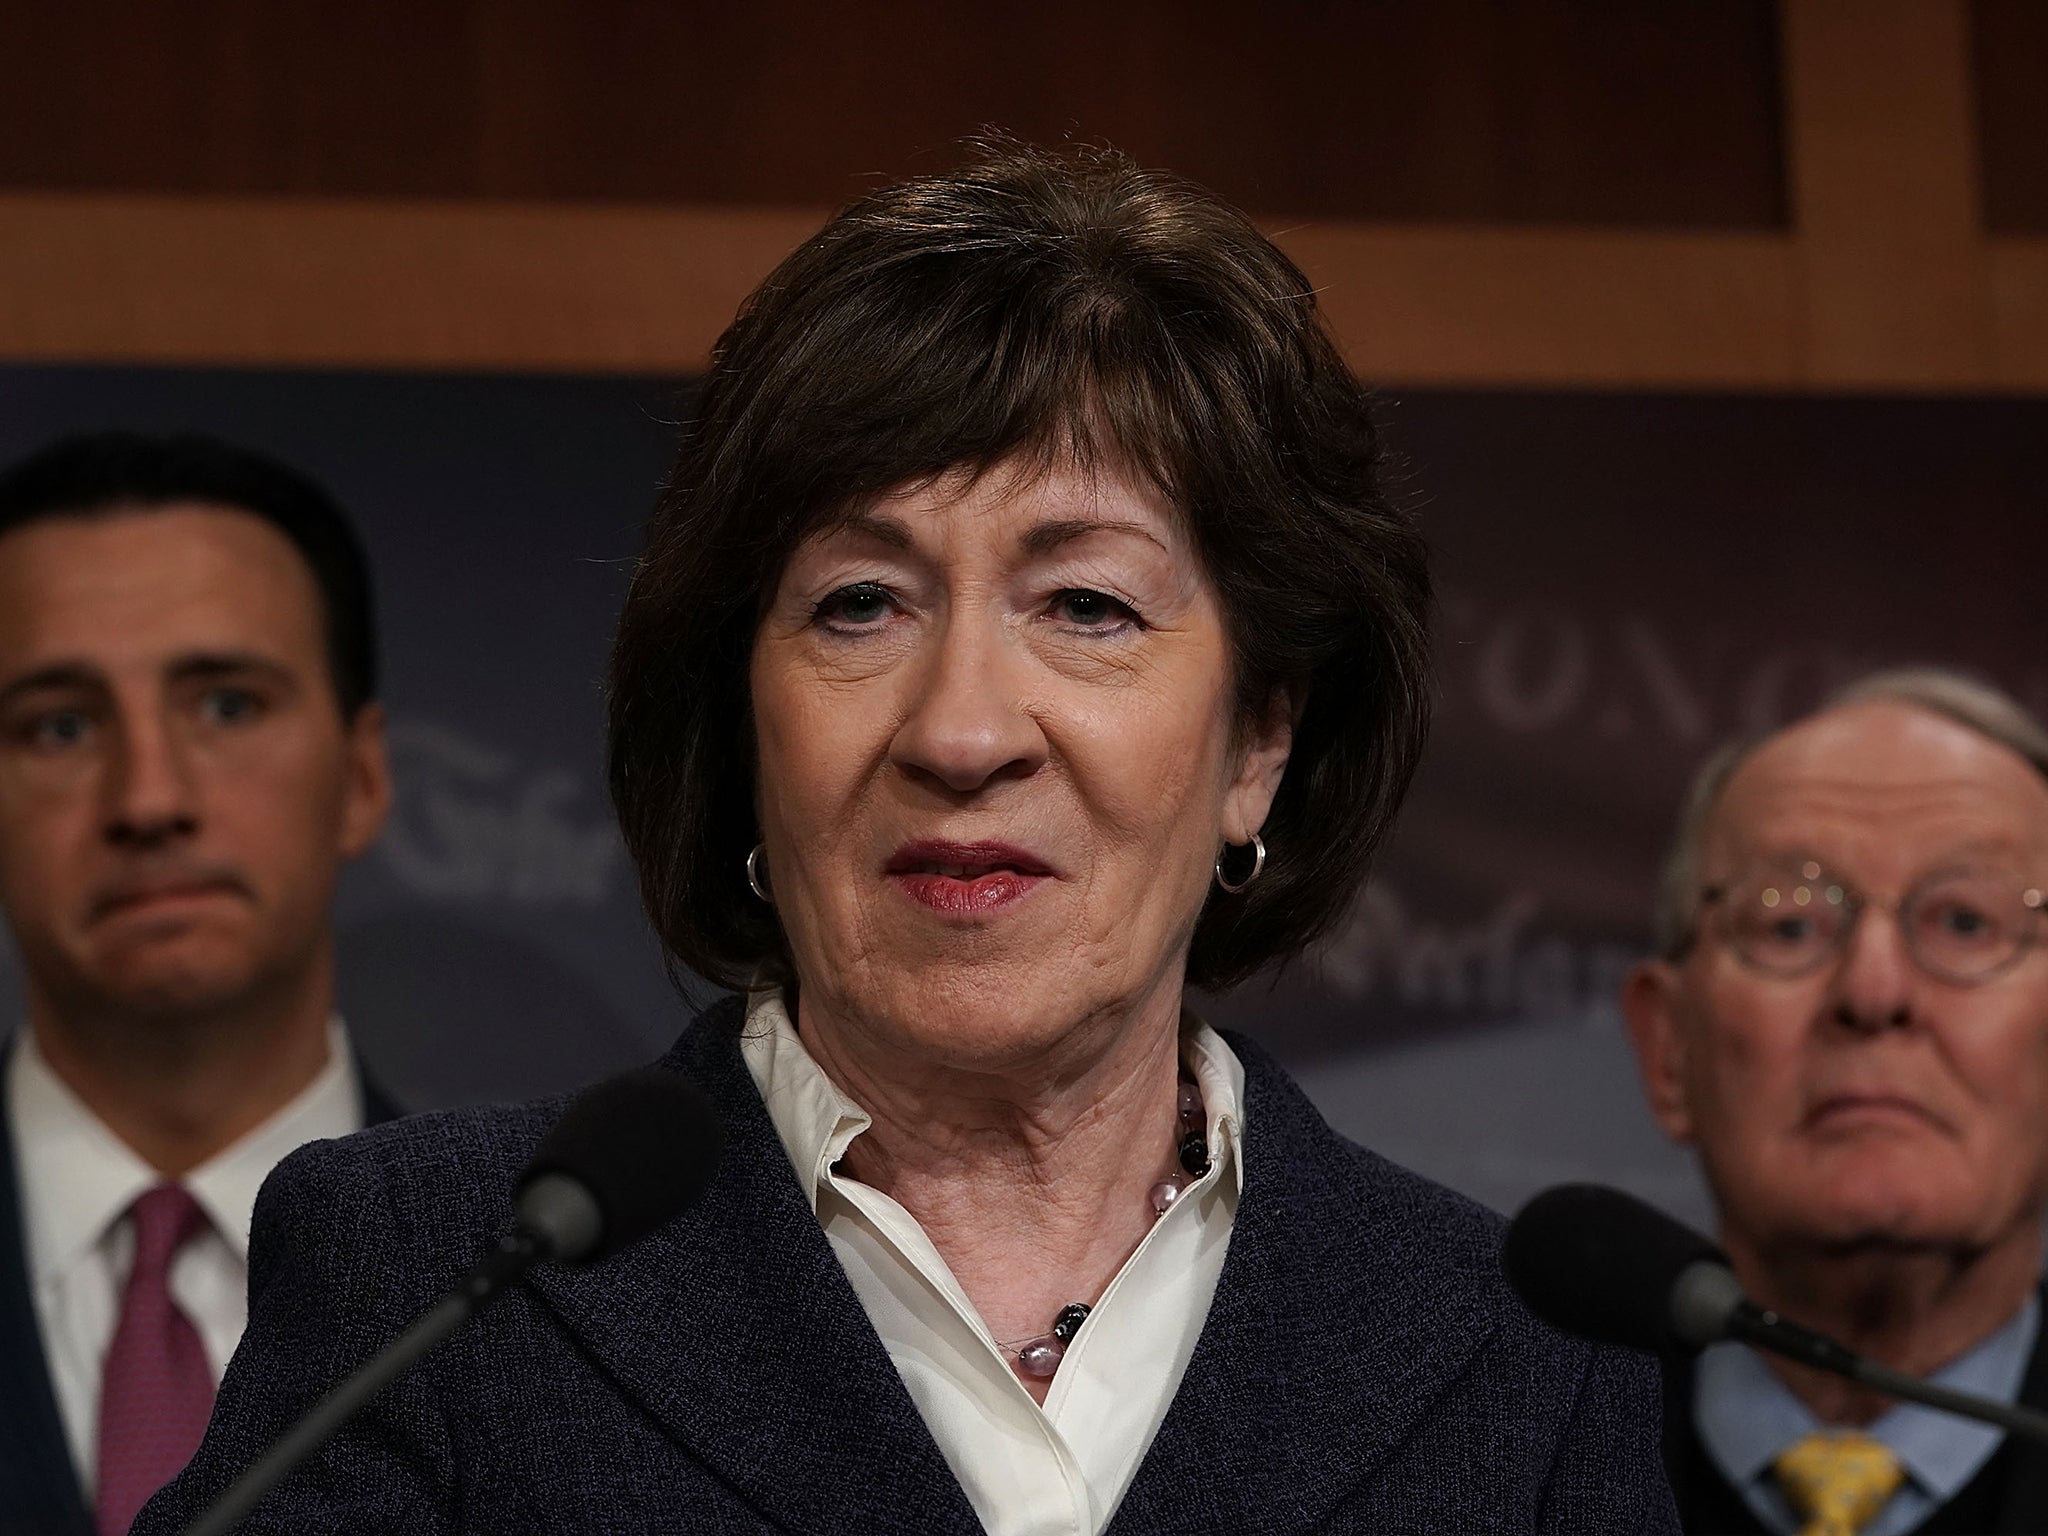 Collins 'It is inappropriate, in my judgment, for senators on either side of the aisle to prejudge the evidence before they have heard what is presented to us'